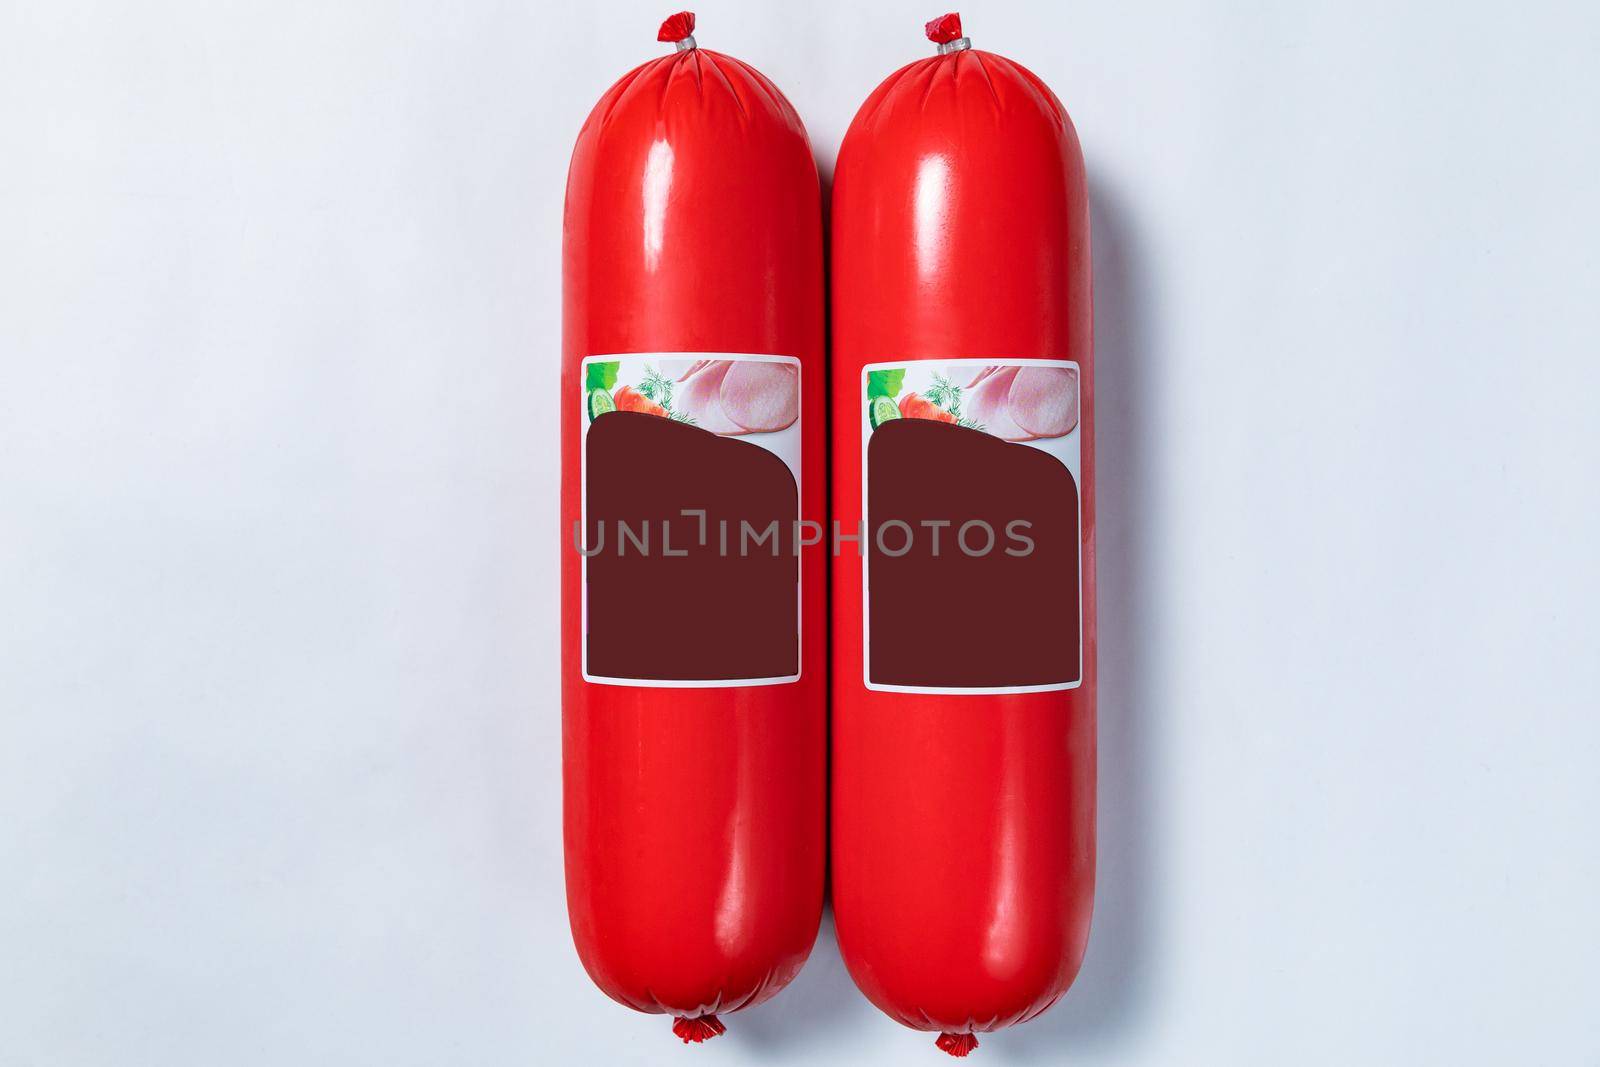 Sausage, salami product, ready for sale on the white background by ferhad